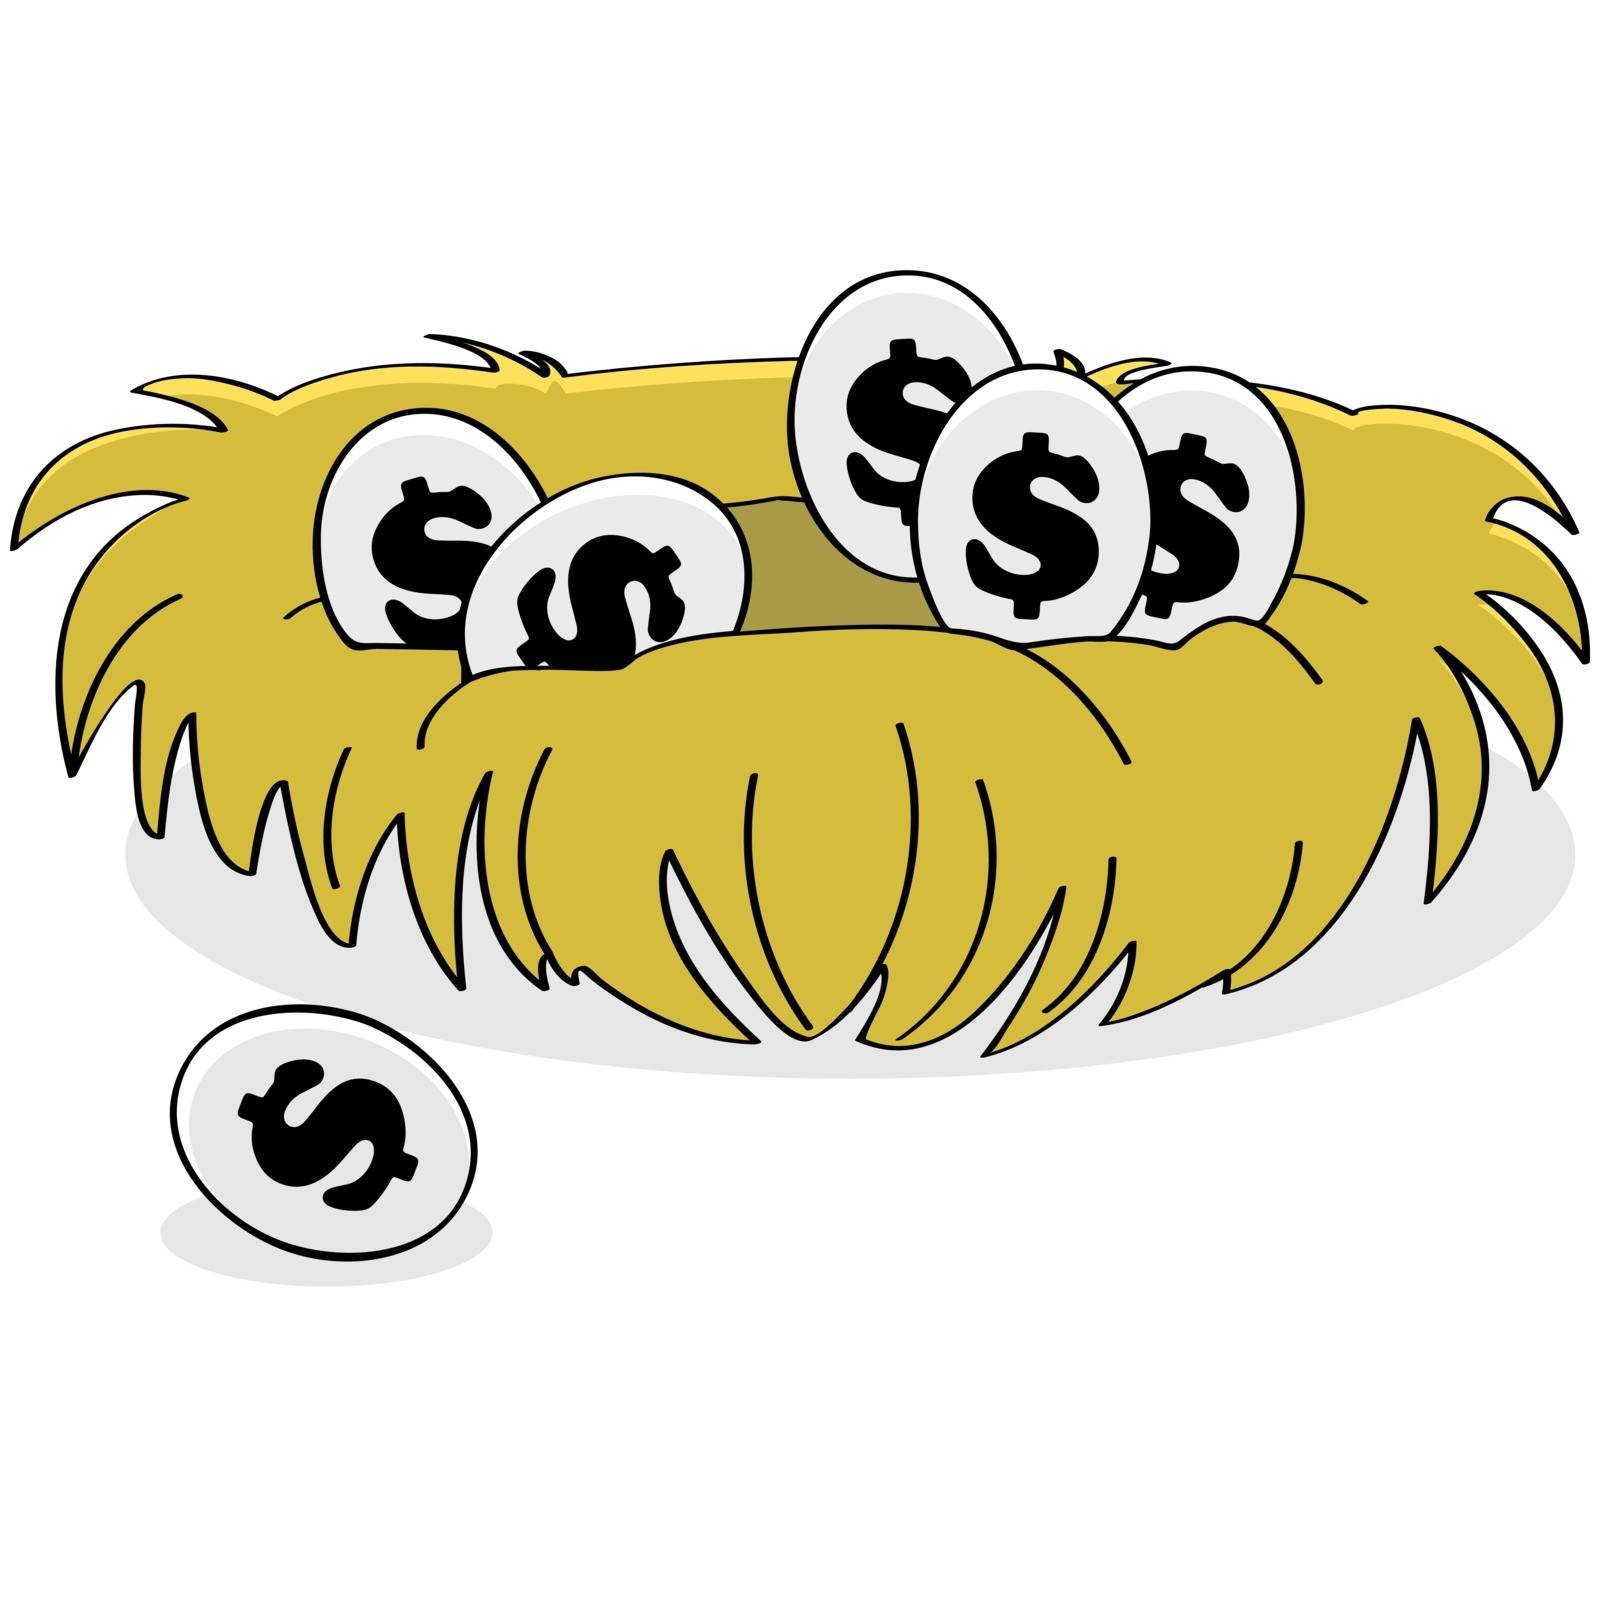 Cartoon illustration showing eggs with dollar signs on them inside a bird nest  